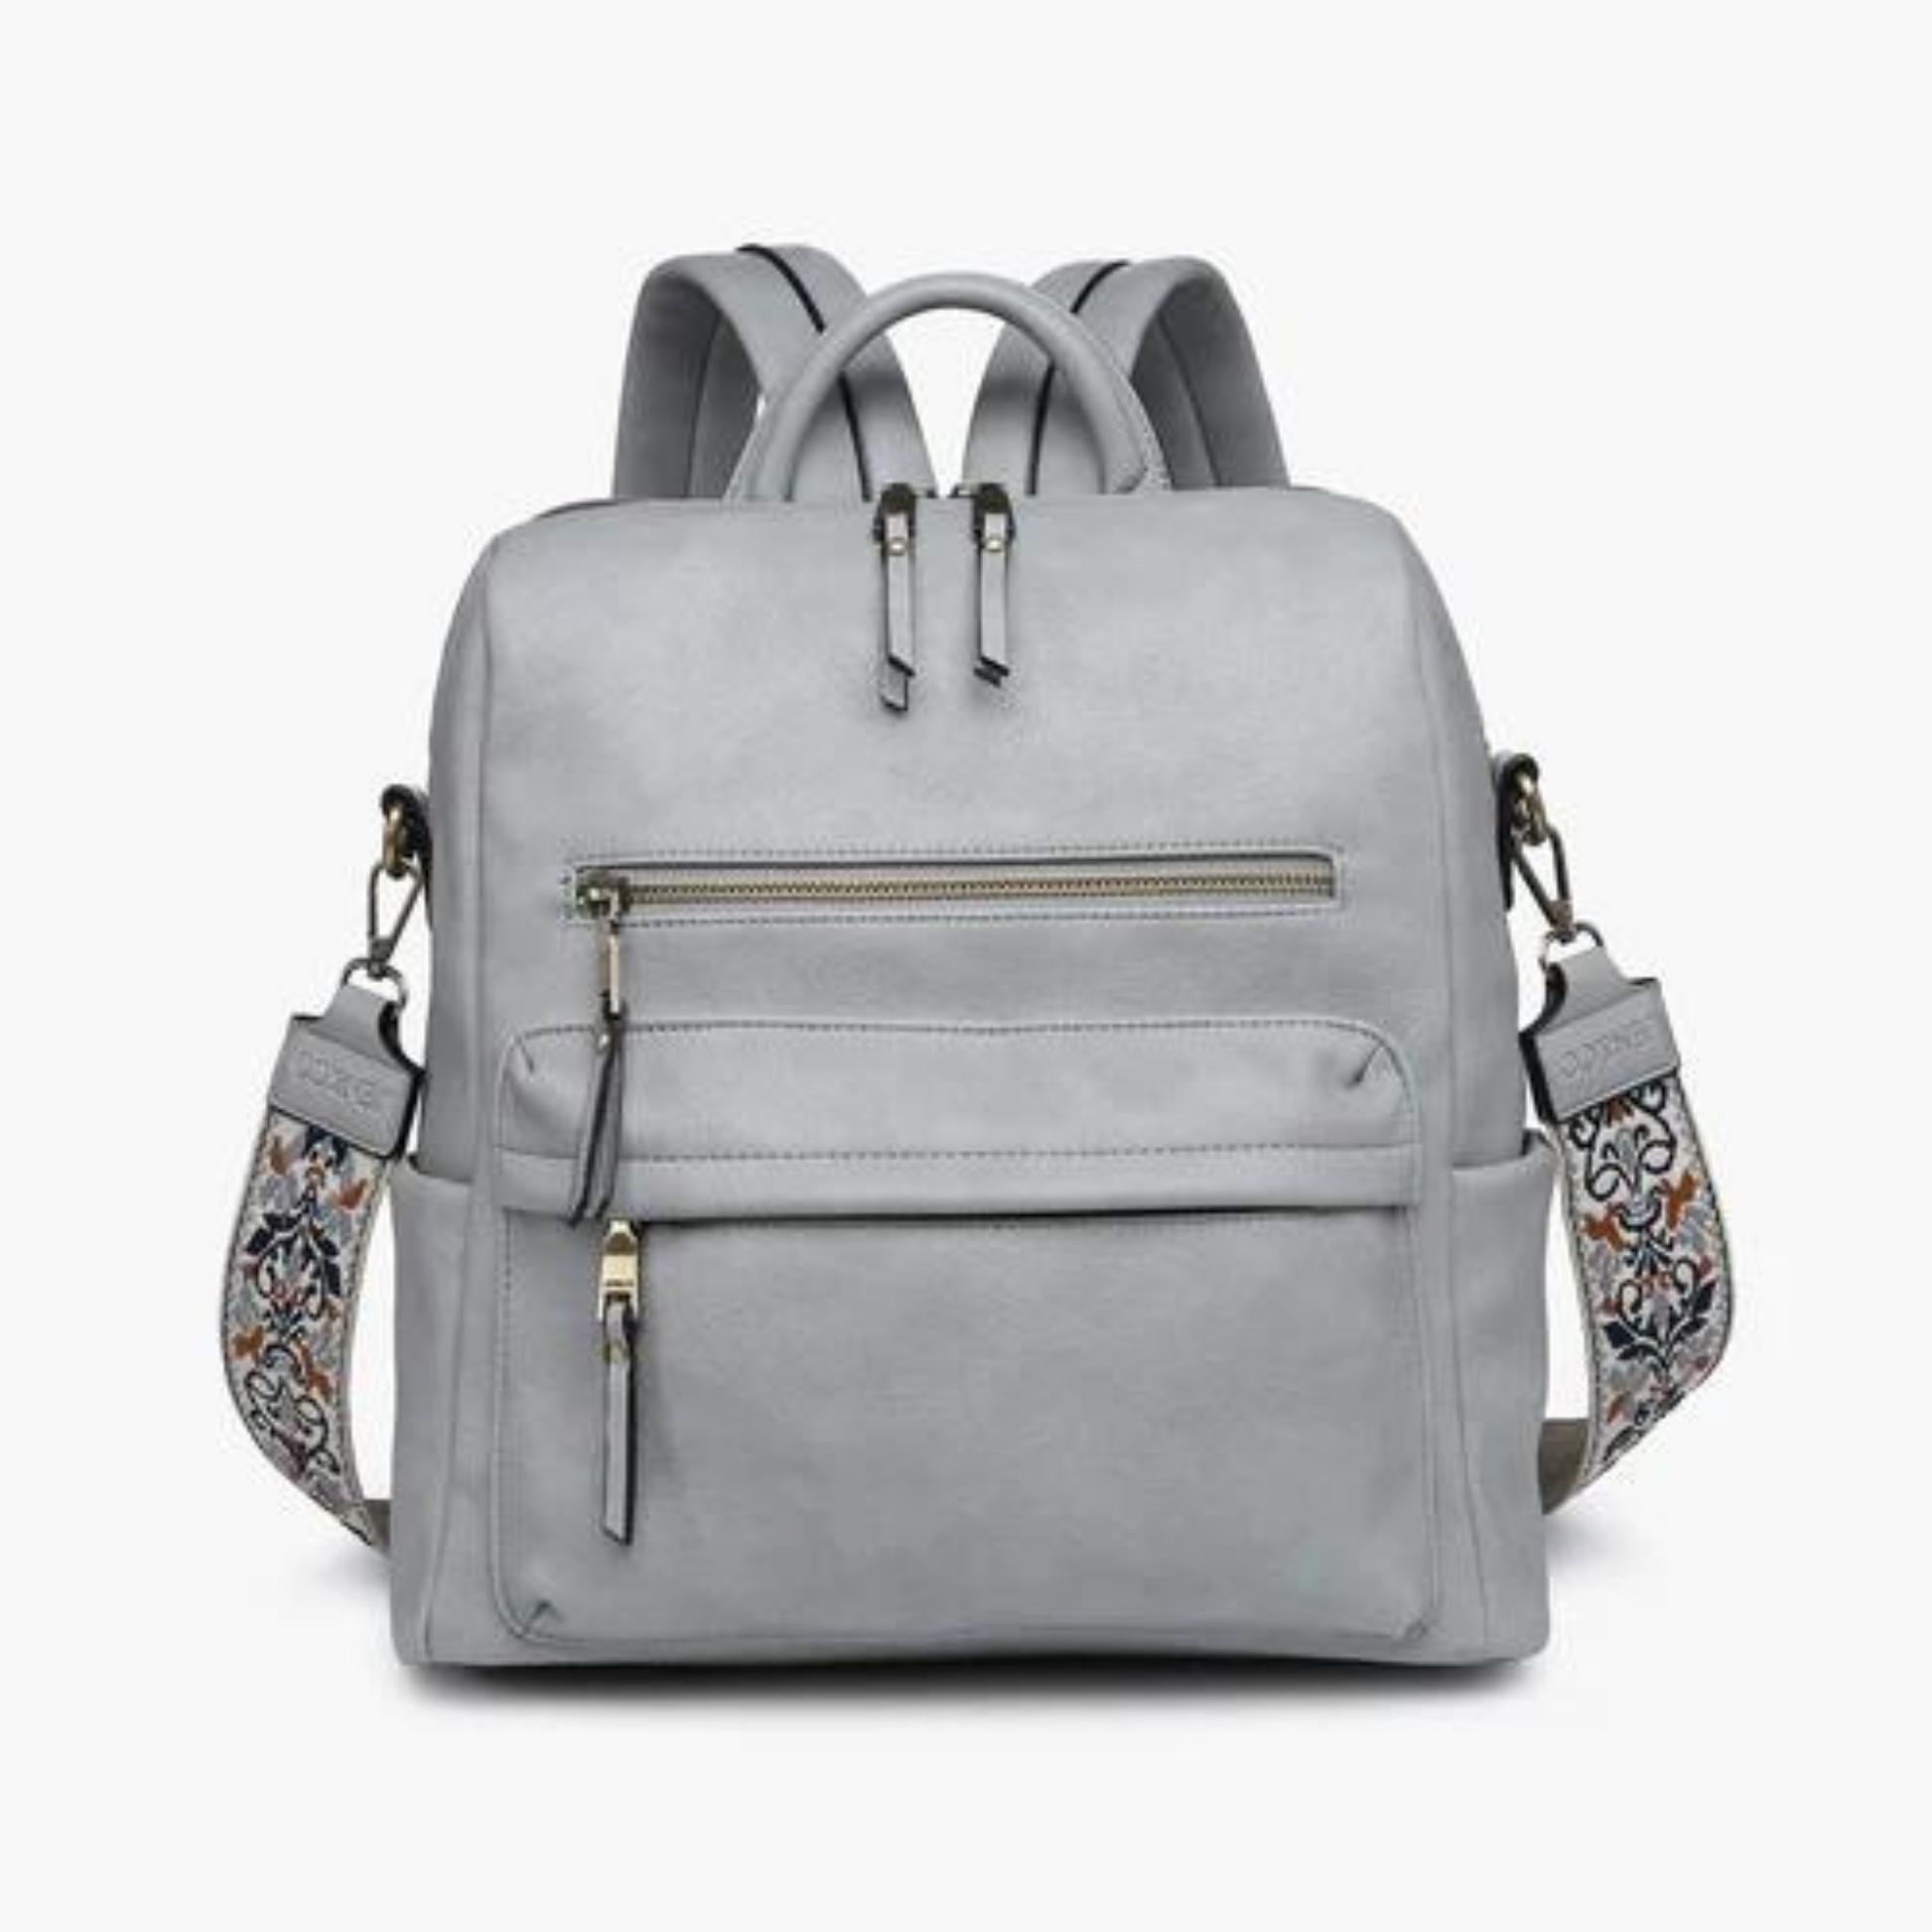 This Convertible Backpack with Guitar Strap has both style and function with its dusty blue and dusty lavender colors. Whether you need a sturdy backpack or versatile guitar strap, this convertible item is perfect for both purposes. Be ready for any adventure with this convenient and stylish carry-all.